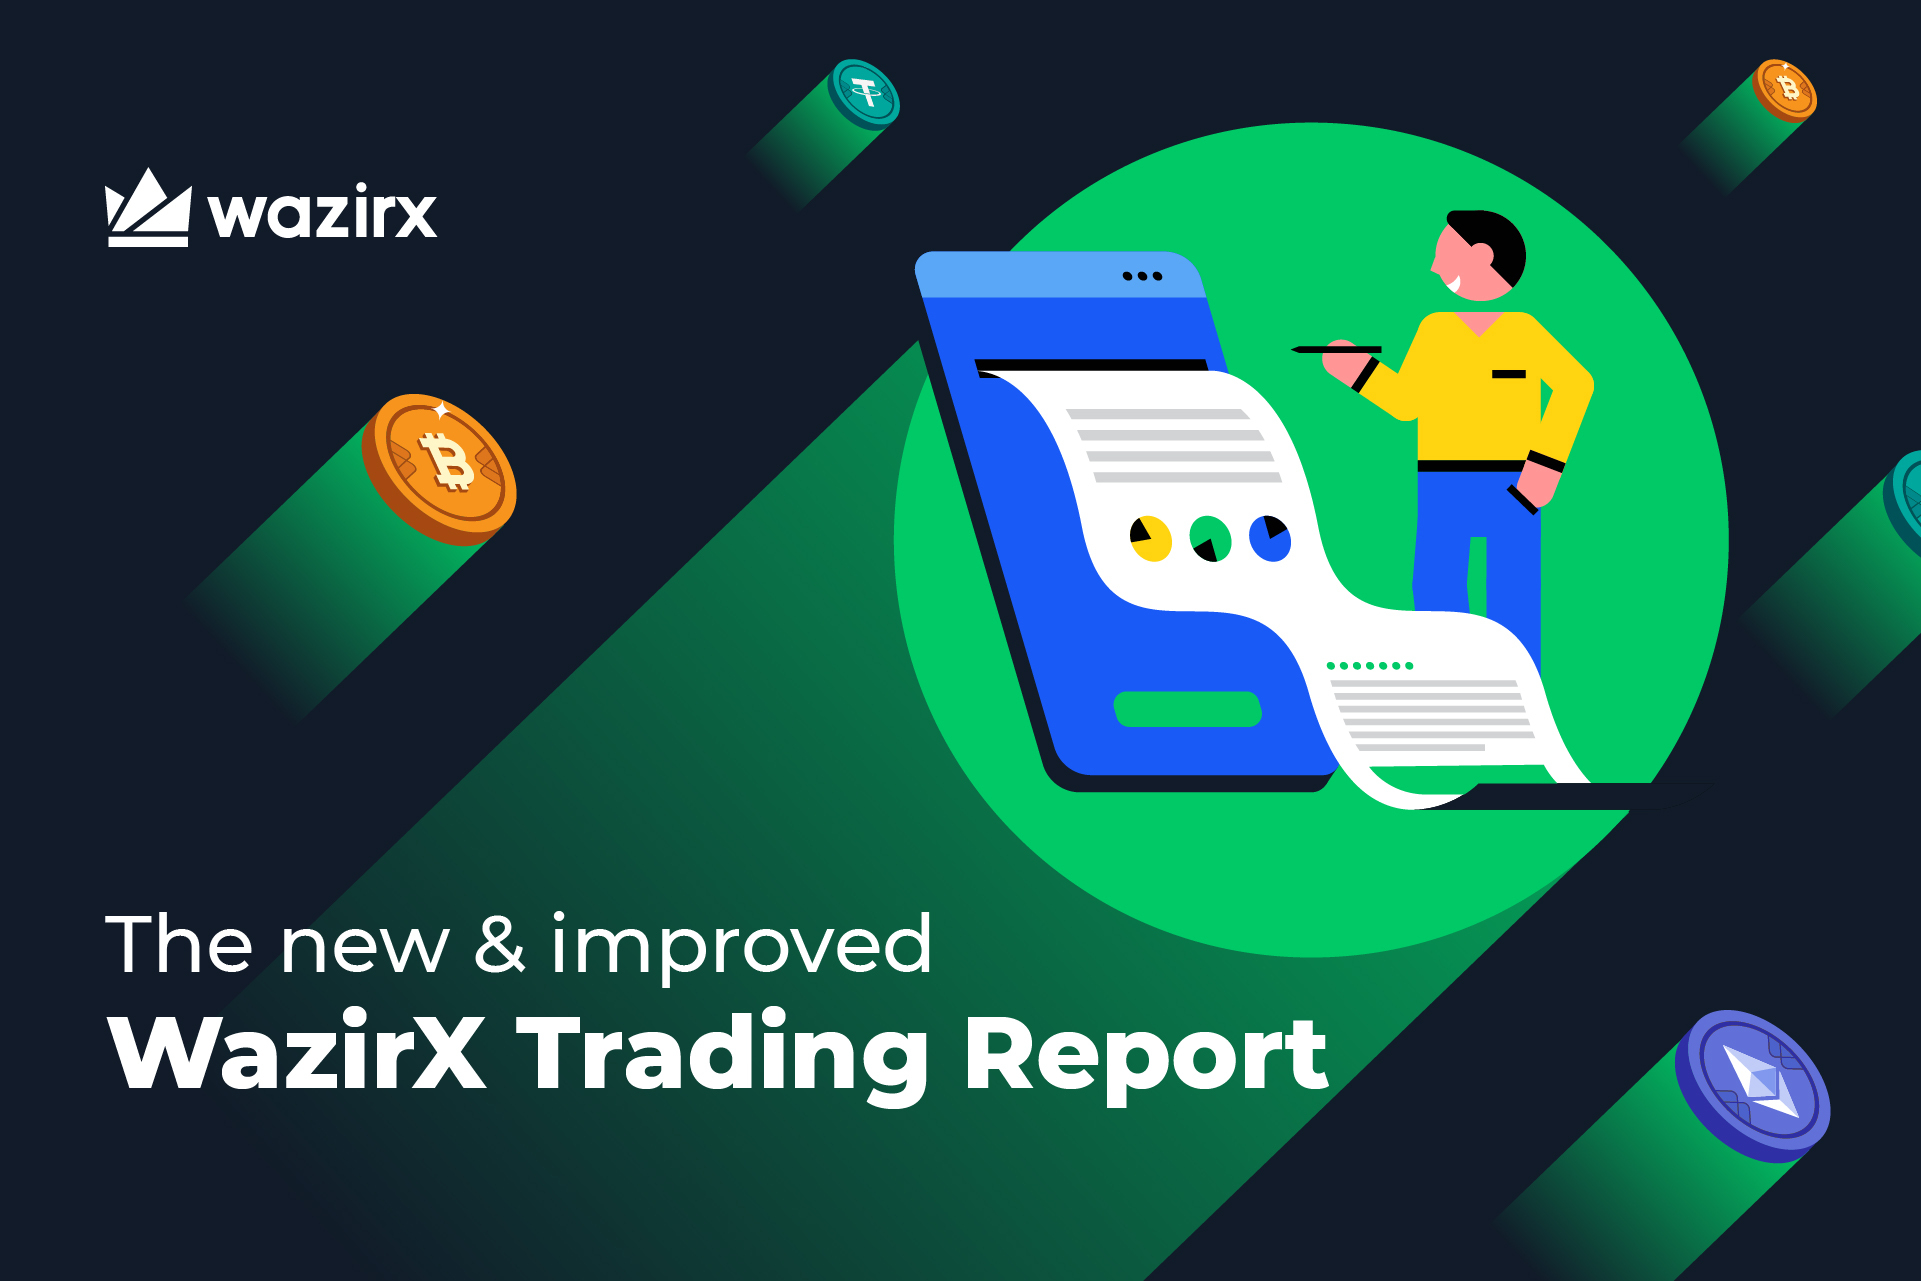 How to download the trading report on WazirX?